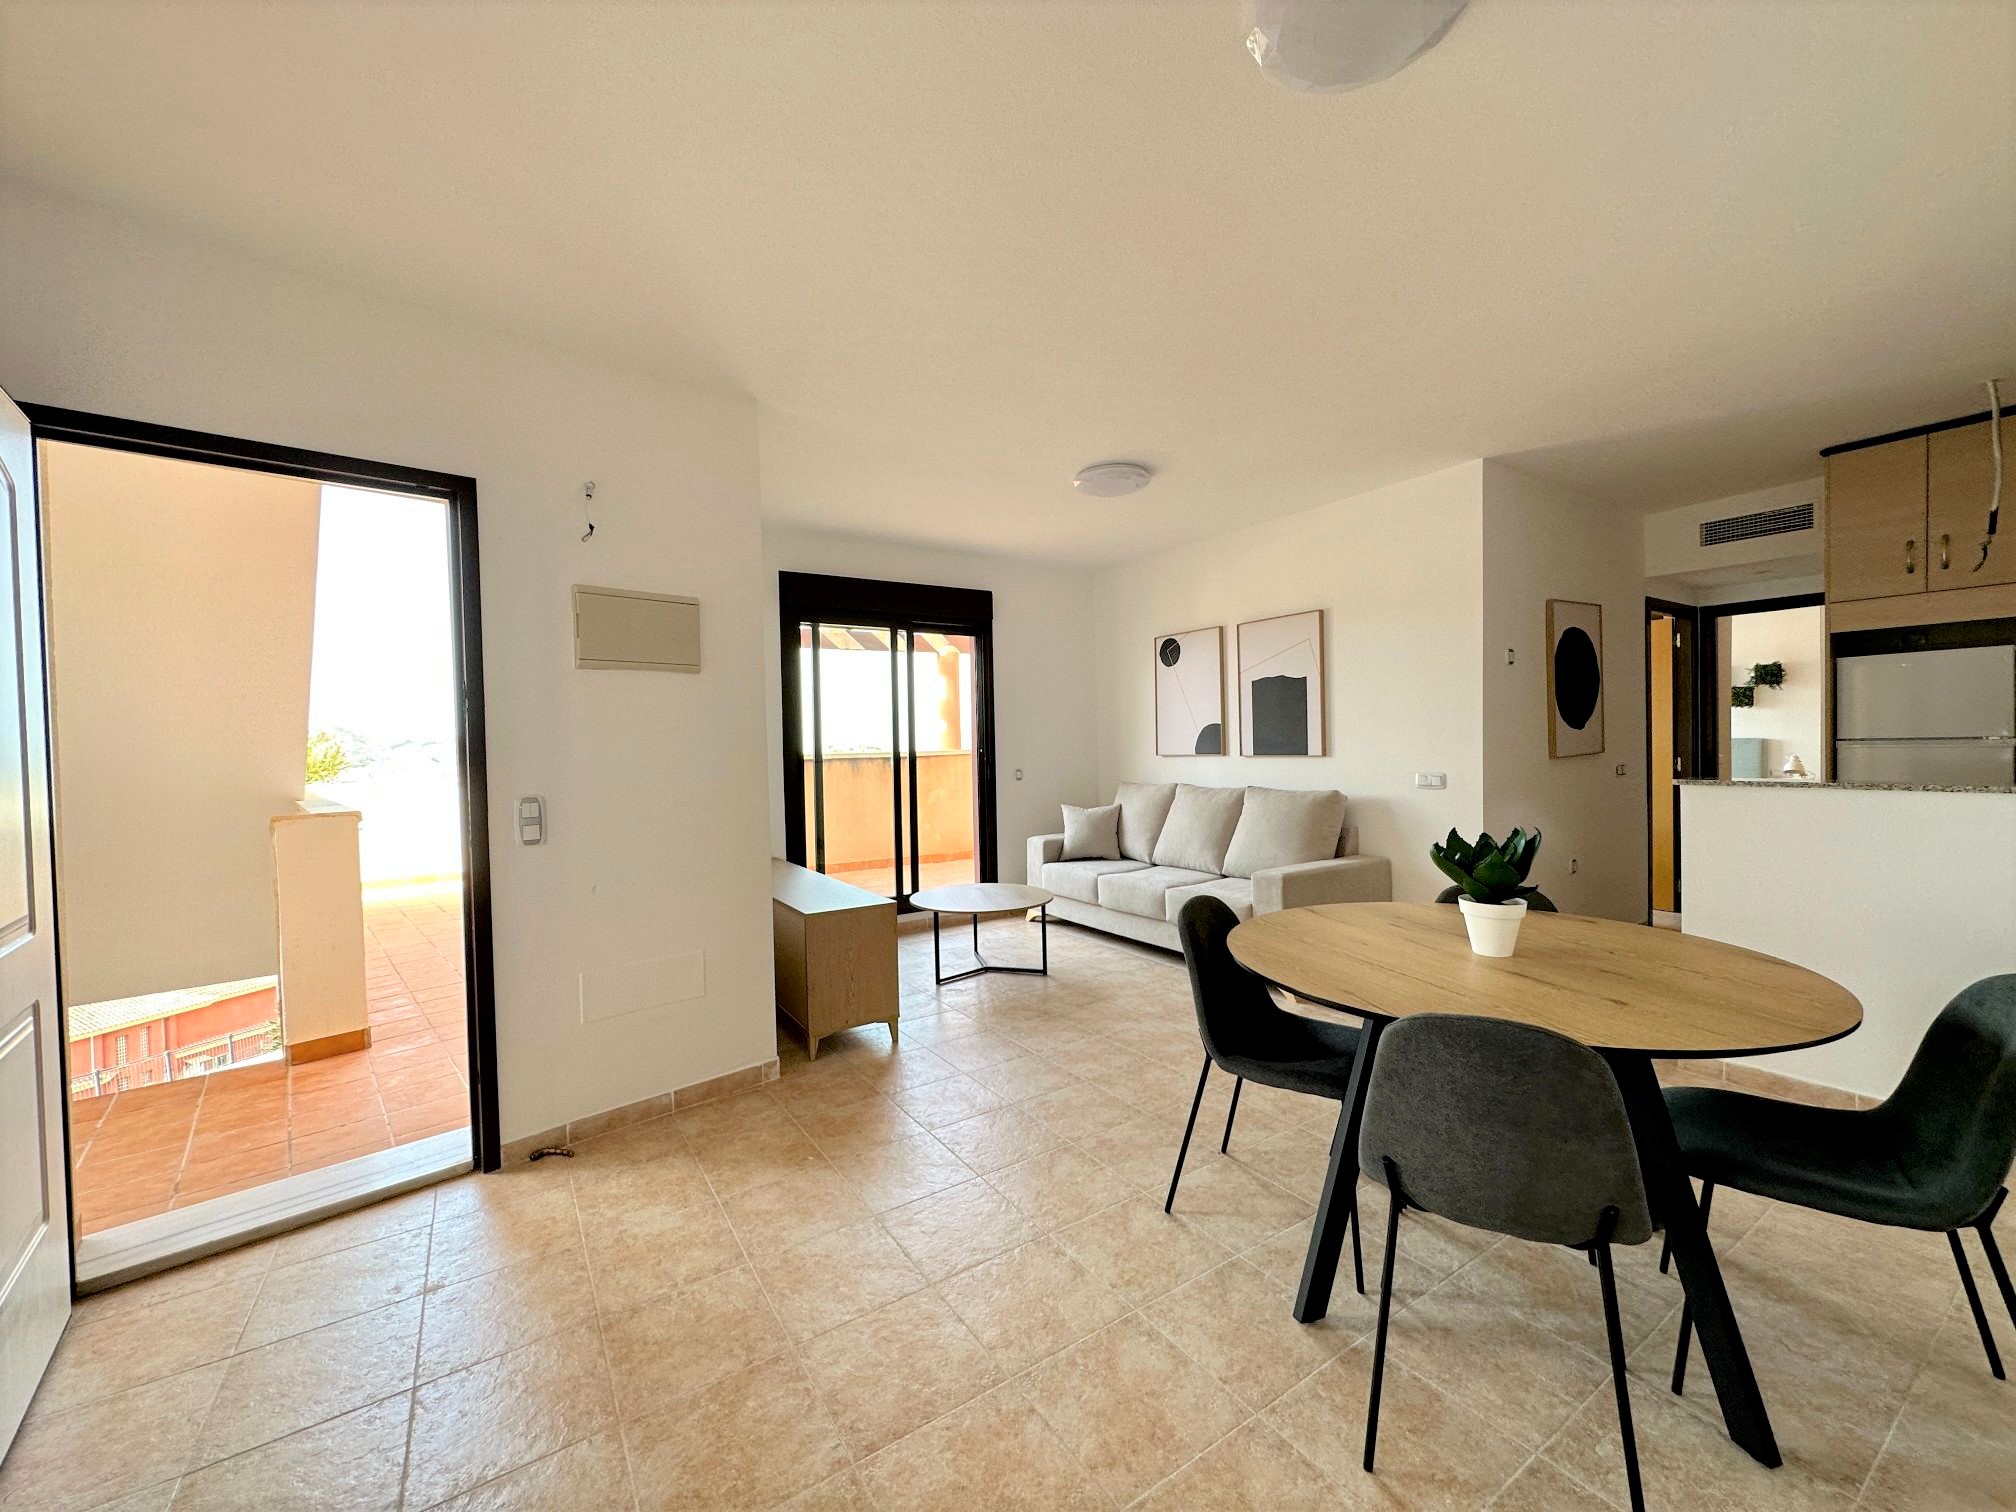 Apartment for sale in Águilas 7